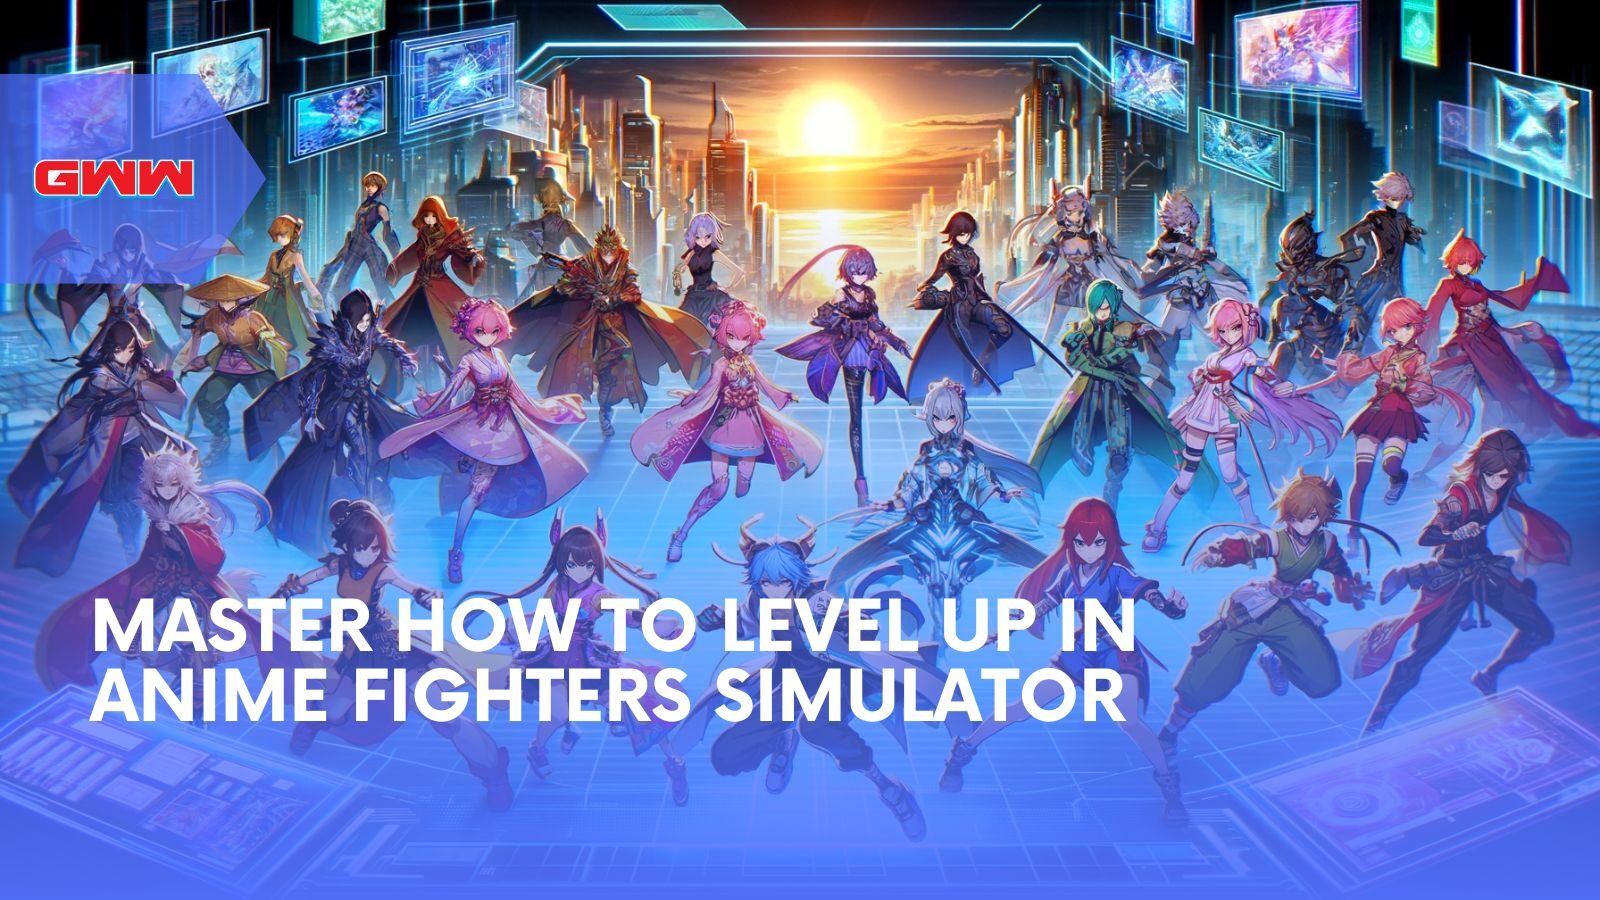 Master How to Level Up in Anime Fighters Simulator